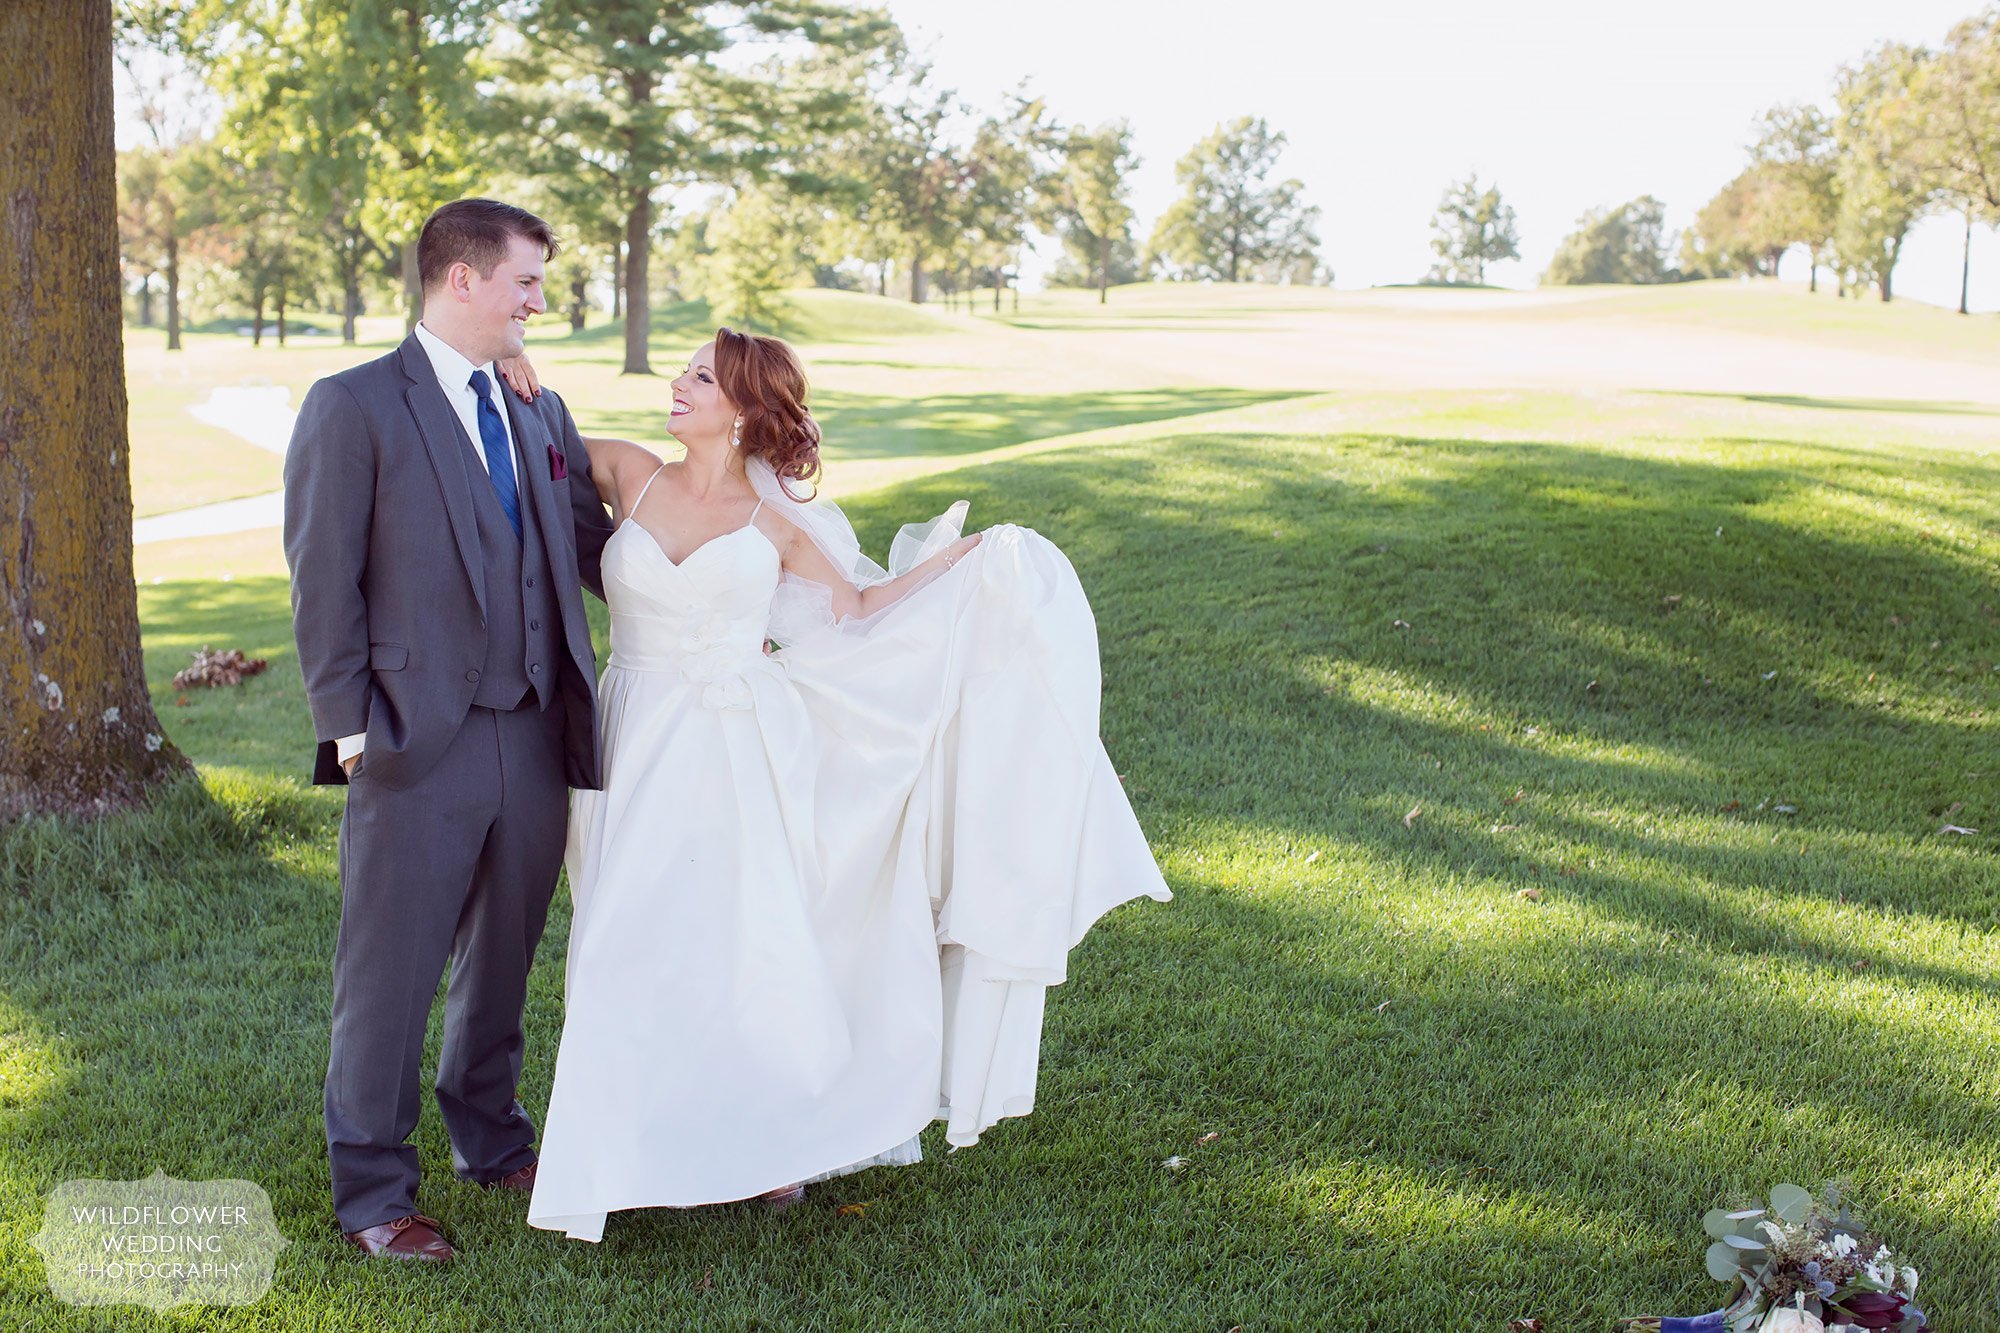 Jefferson City Country Club outdoor wedding in MO.